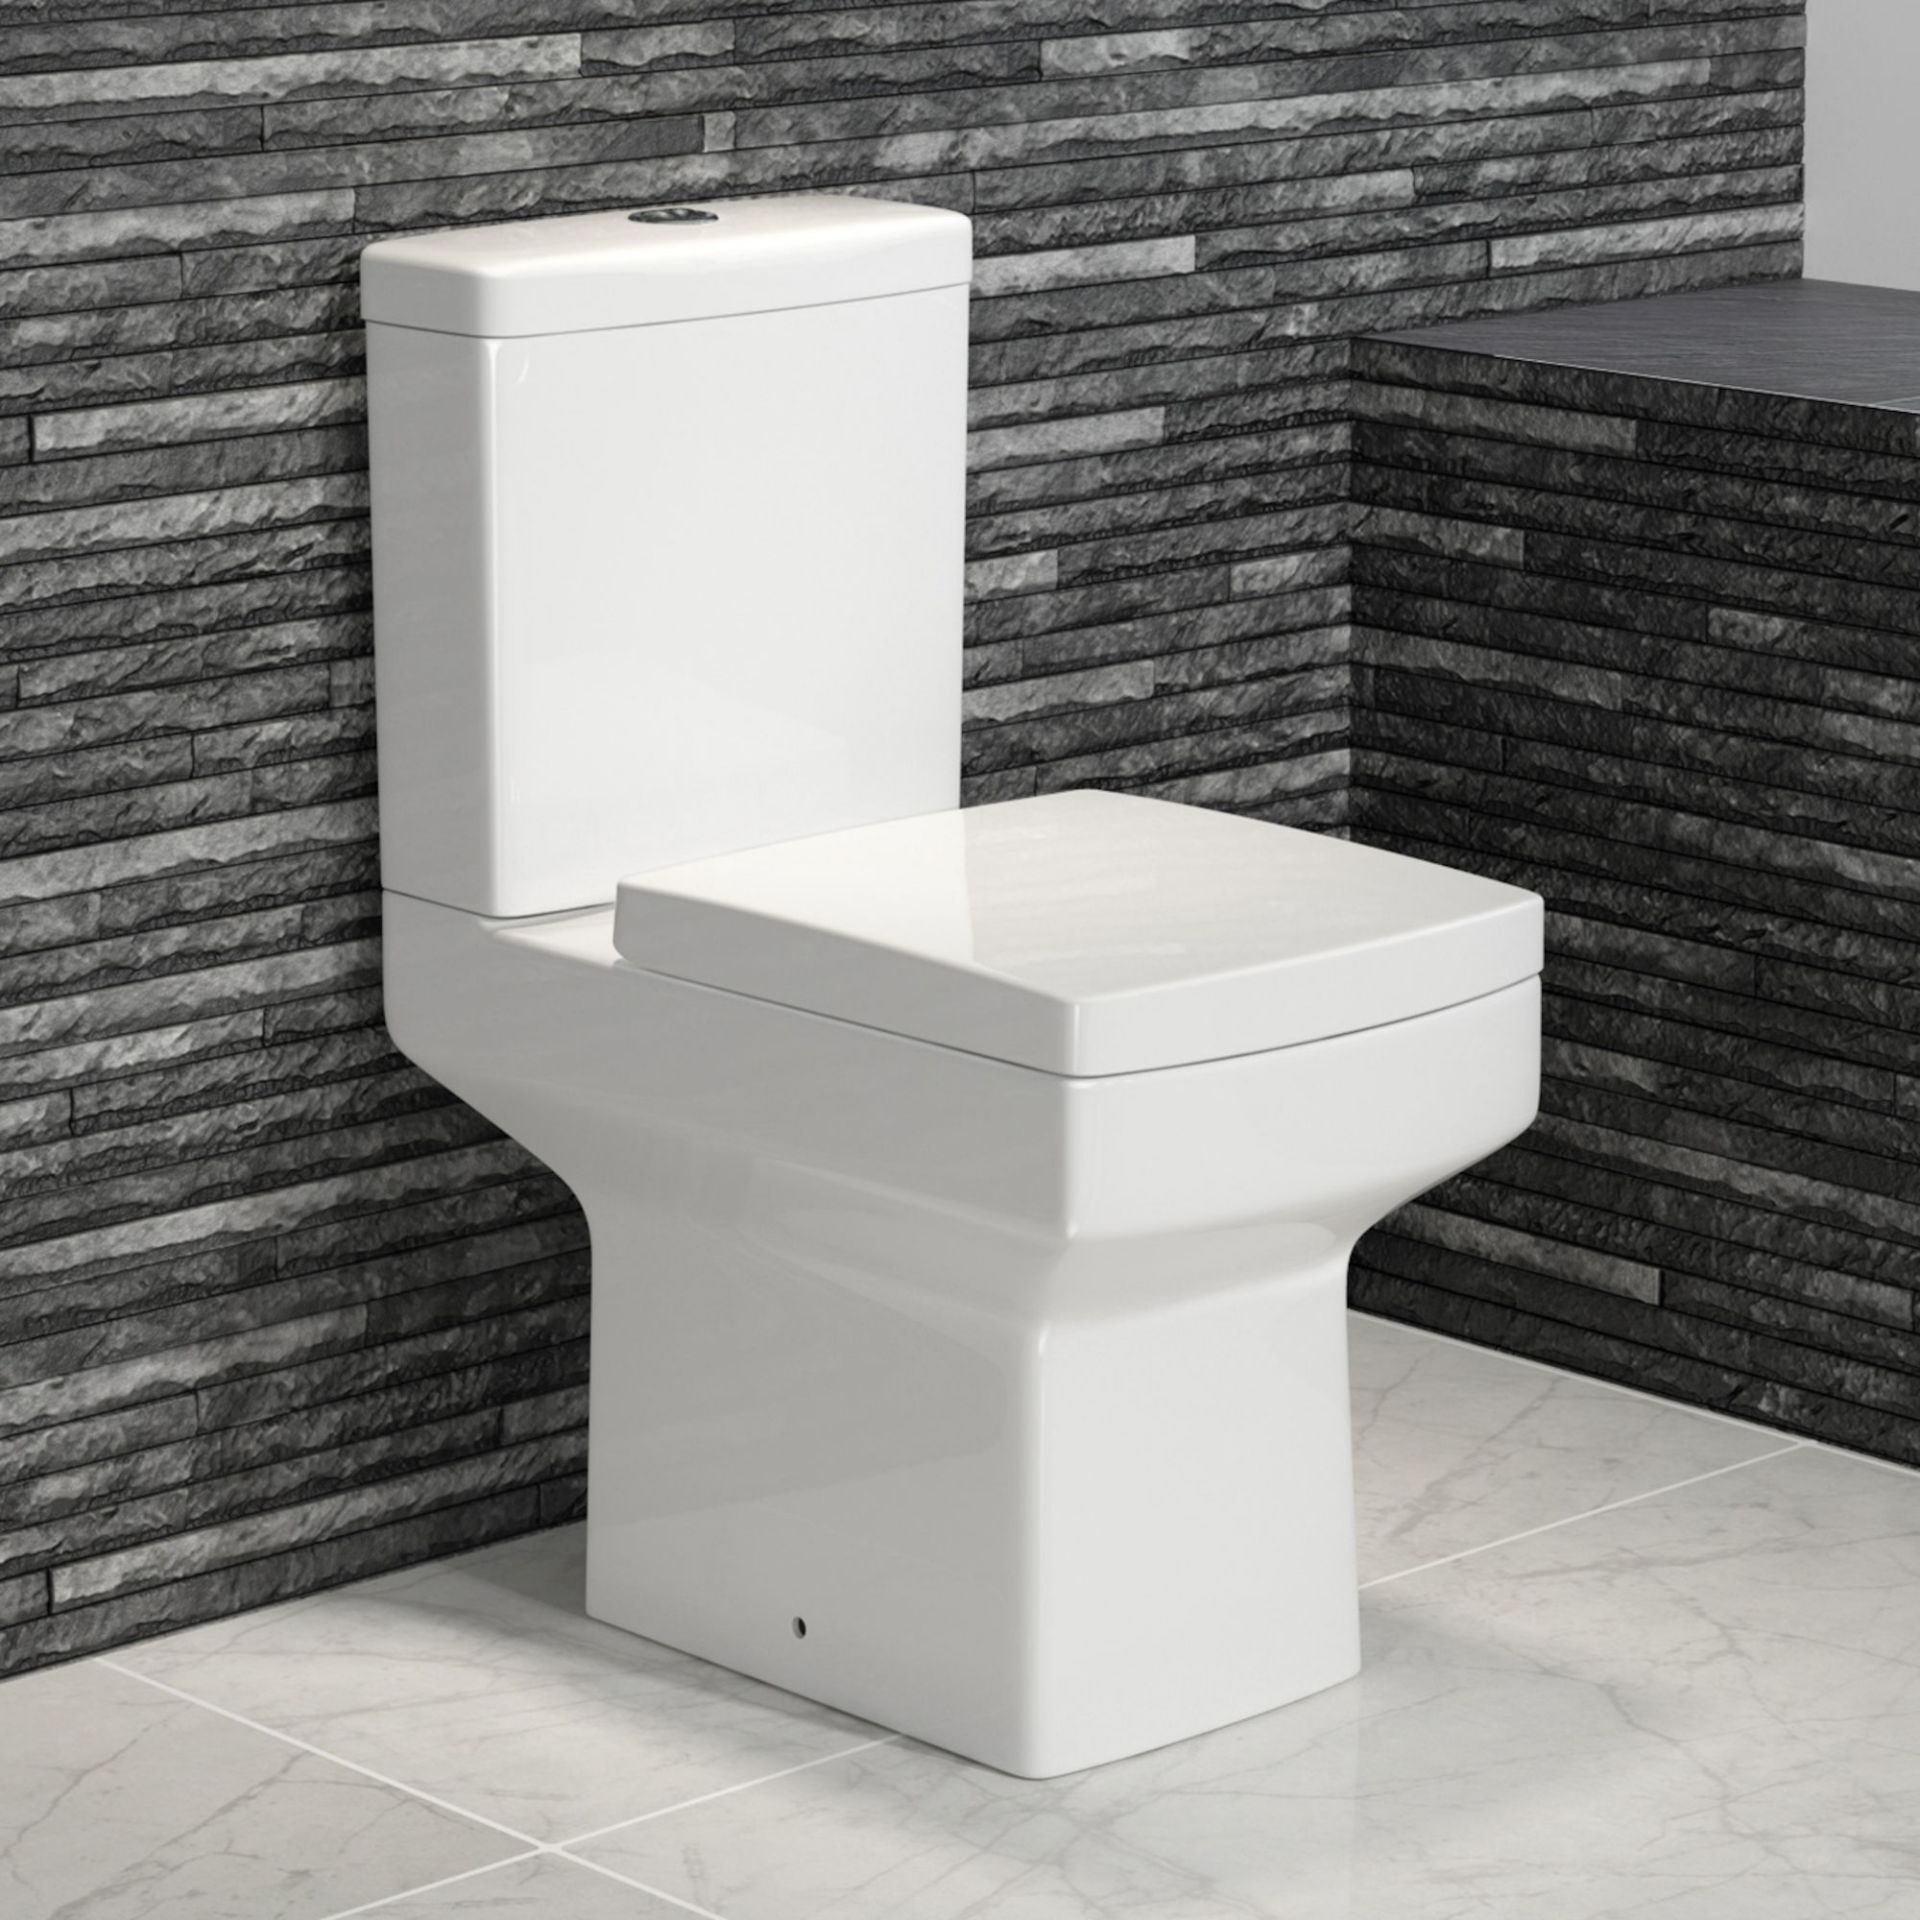 (OS101) Belfort Close Coupled Toilet & Cistern inc Soft Close Seat. Made from White Vitreous China